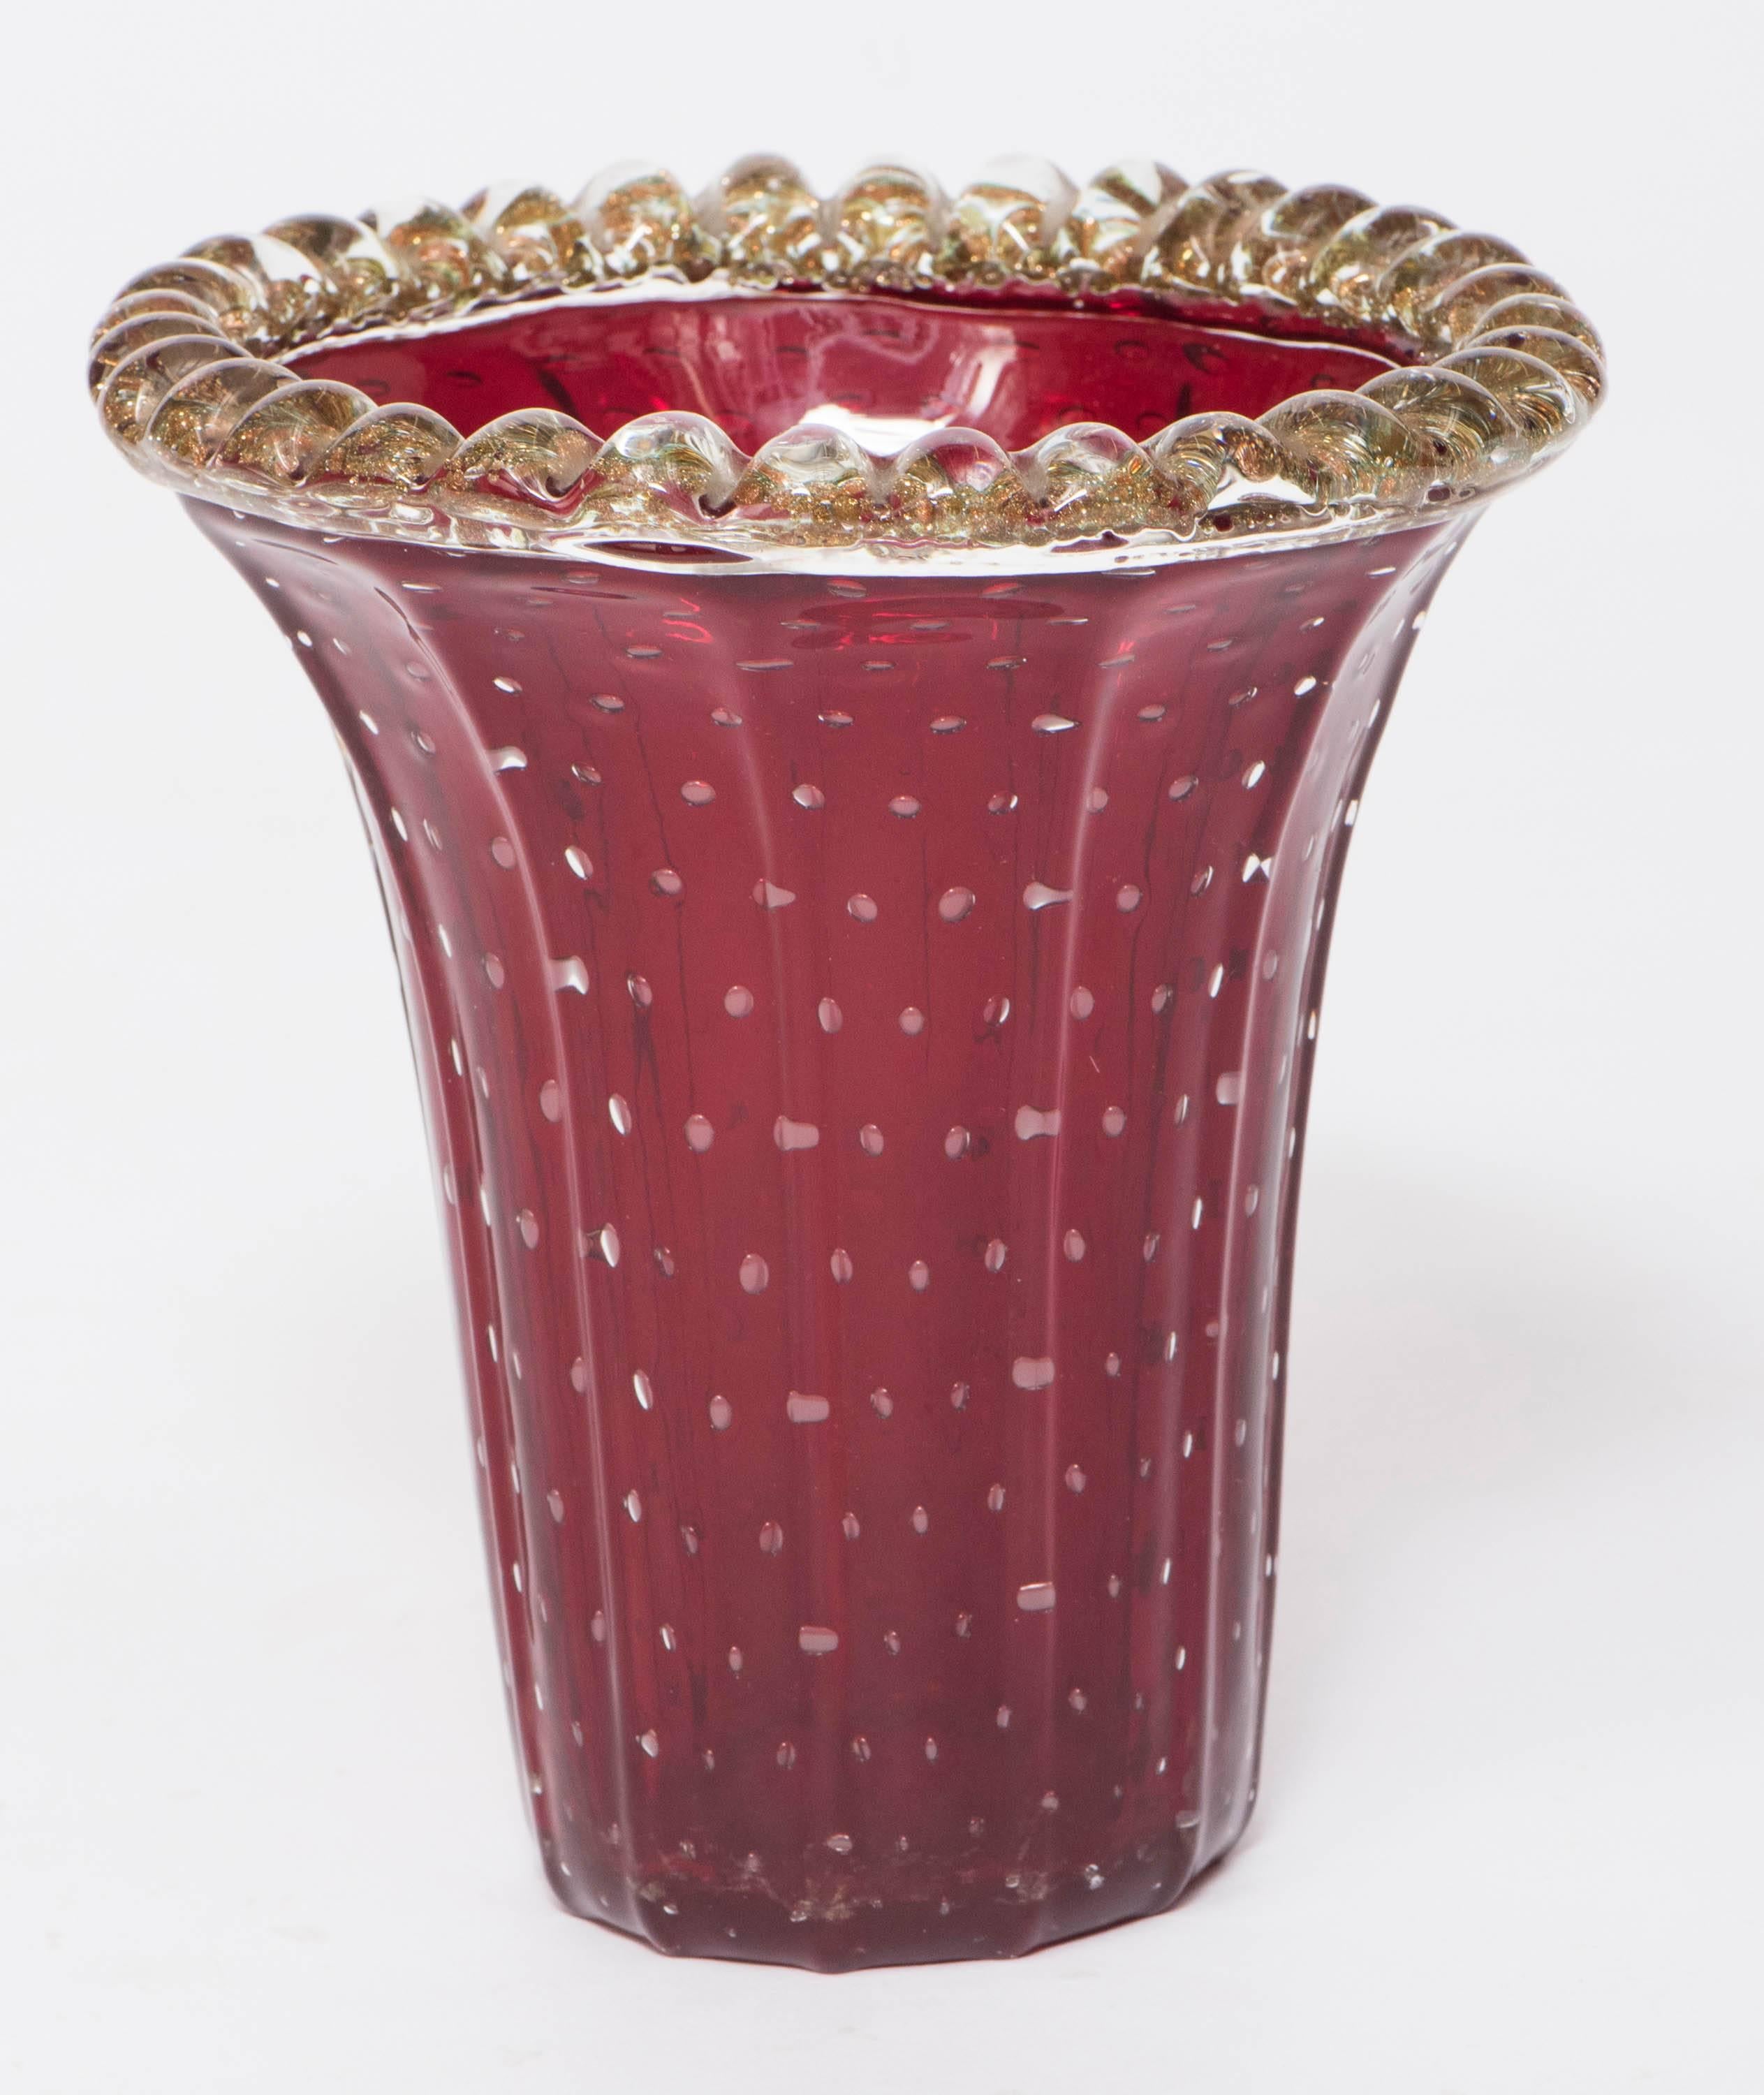 Murano Glass vase by Pino Signoretto, Italy, circa 1940.
Red color with a clear glass frill to top.
Signed to the base.
Measures: 19cm high x 18 cm diameter.